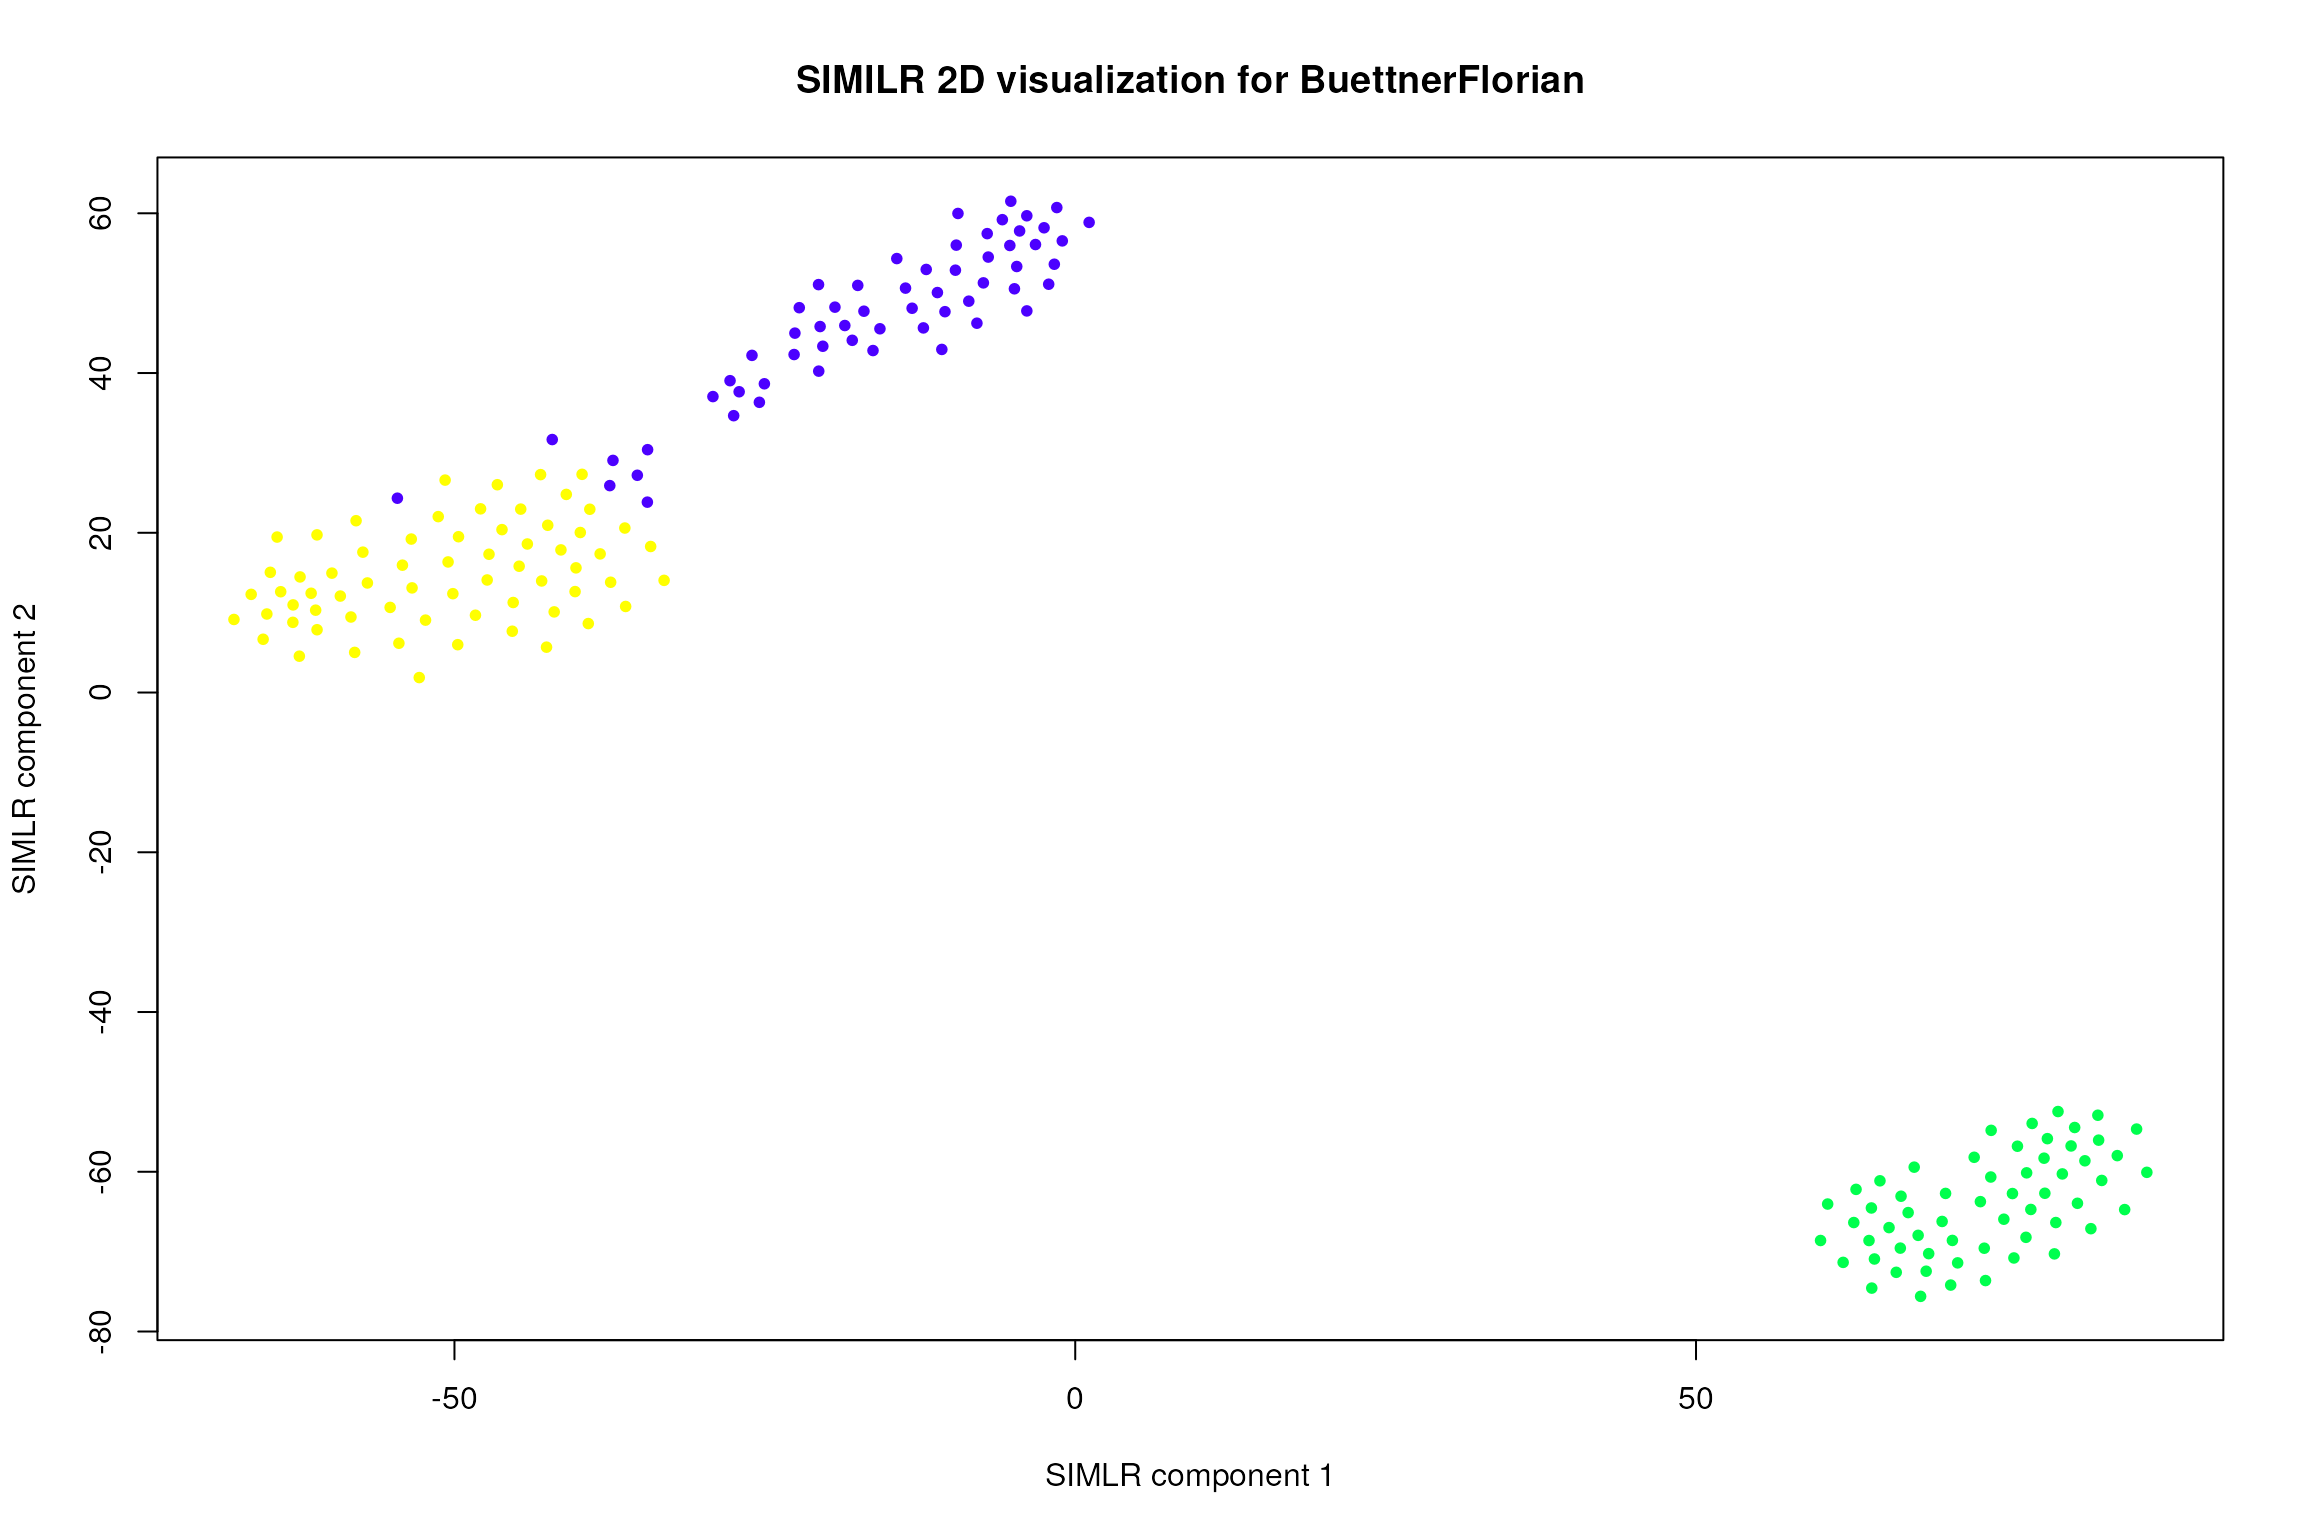 Visualization of the 3 cell populations retrieved by SIMLR on the dataset by Florian, et al.